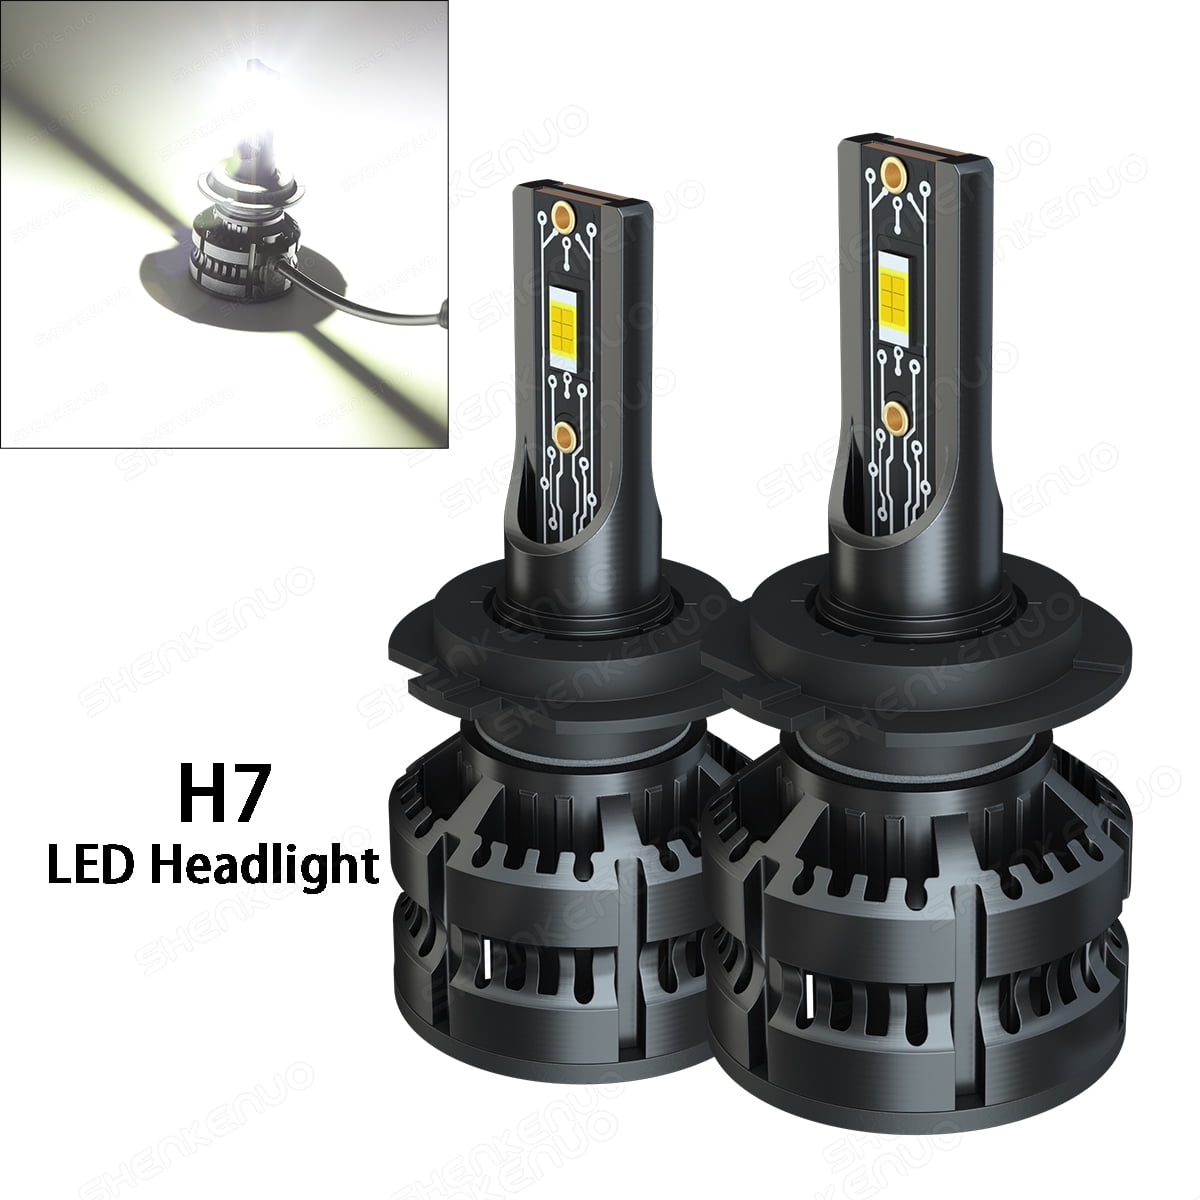  HSUN BAY9S H21W LED Bulbs,High Power 20LED SMD3014 Chip 880LM  Extremely Bright Bulbs with Canbus for Dome Reading and Indicator Light,2  Pack,6000K White : Automotive